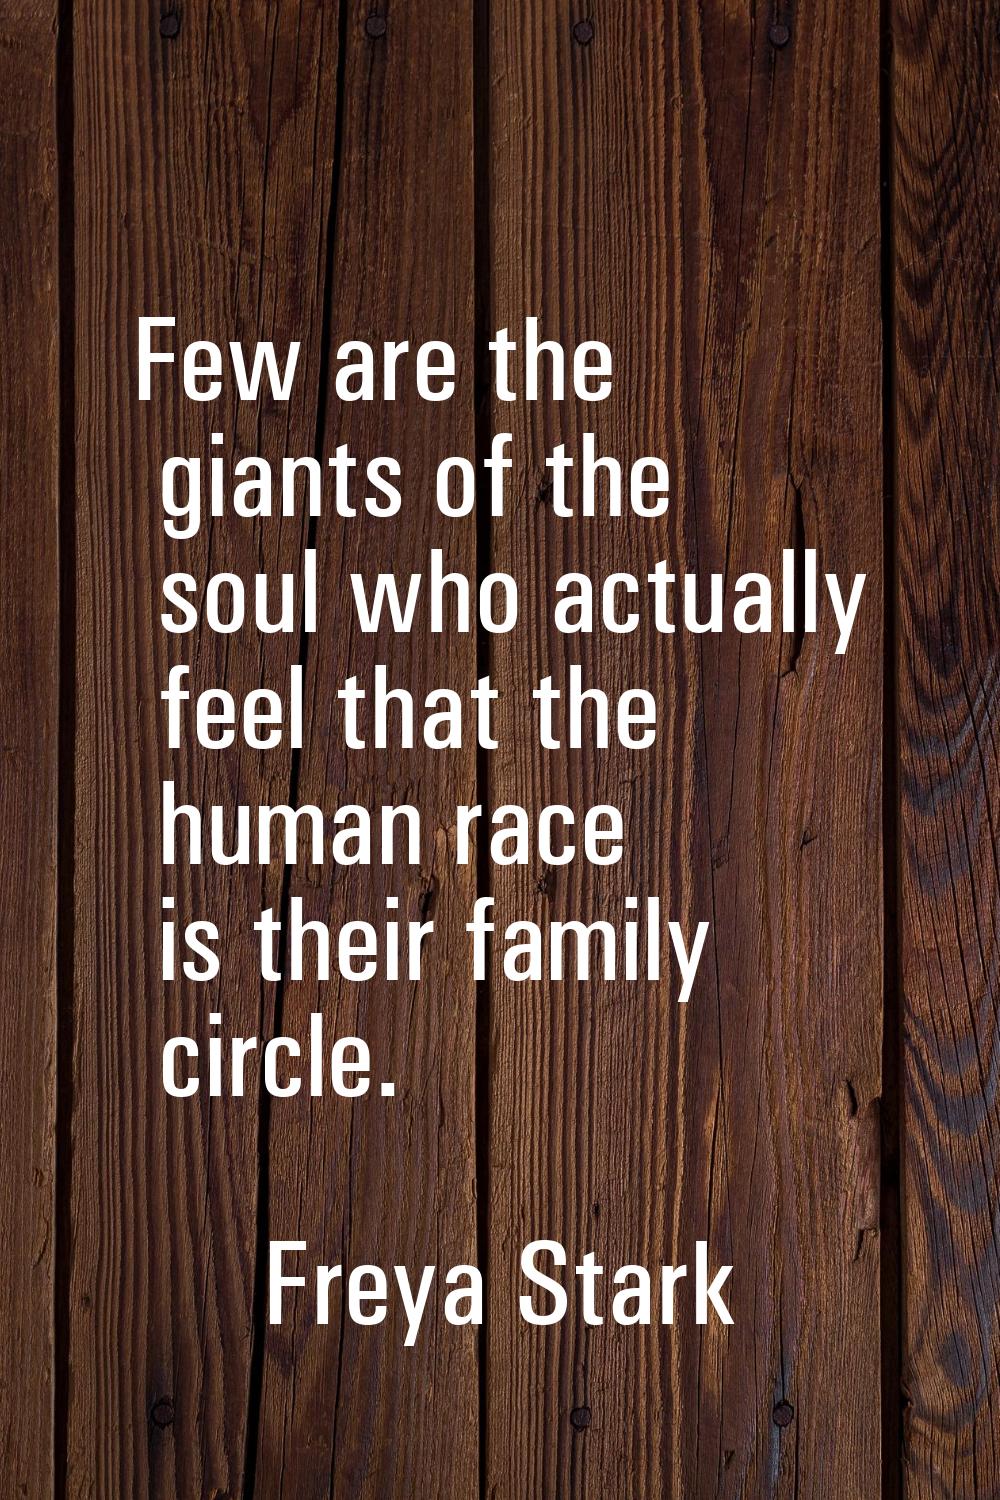 Few are the giants of the soul who actually feel that the human race is their family circle.